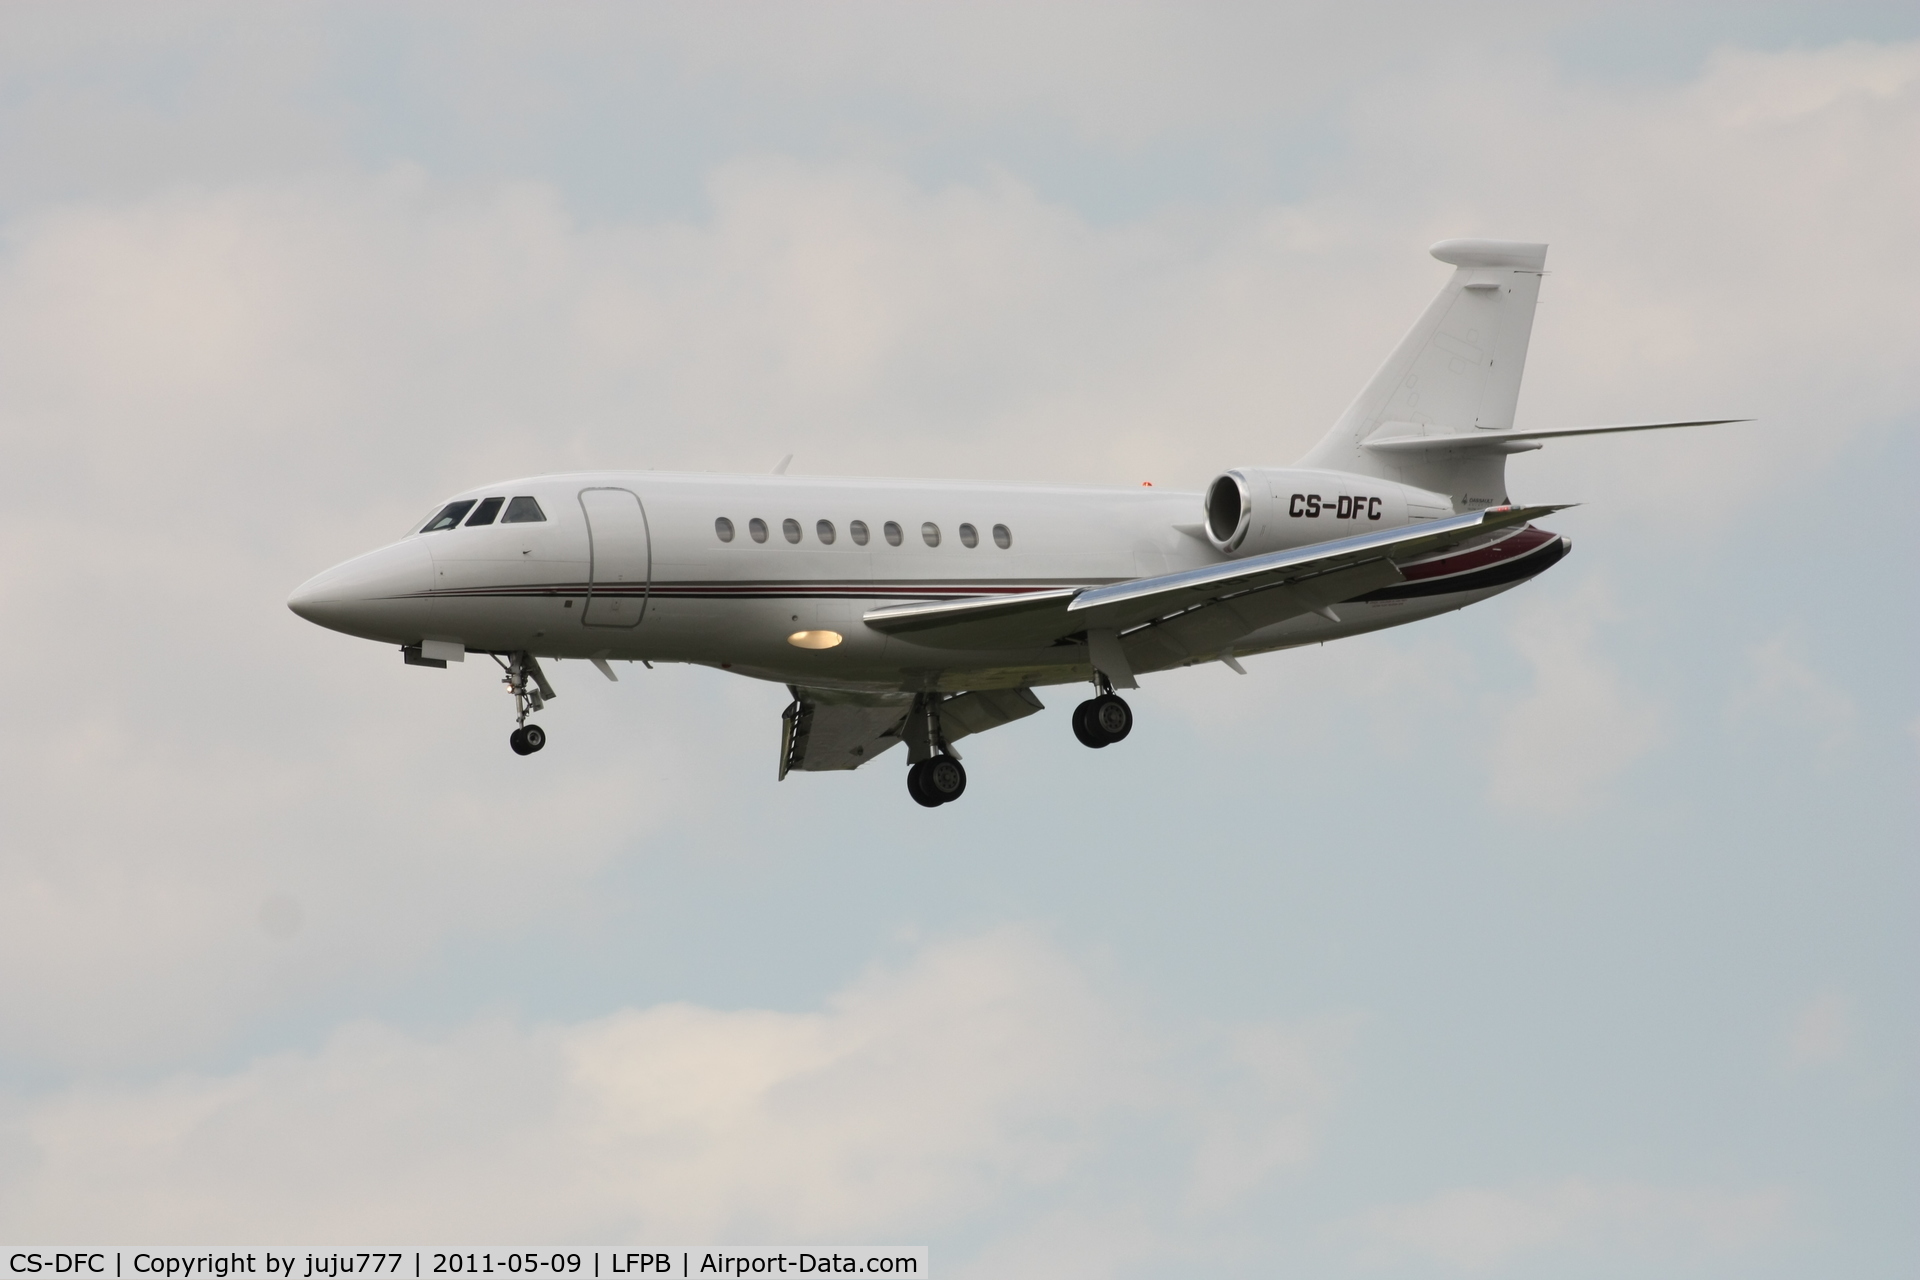 CS-DFC, 2001 Dassault Falcon 2000 C/N 148, on transit at Le Bourget